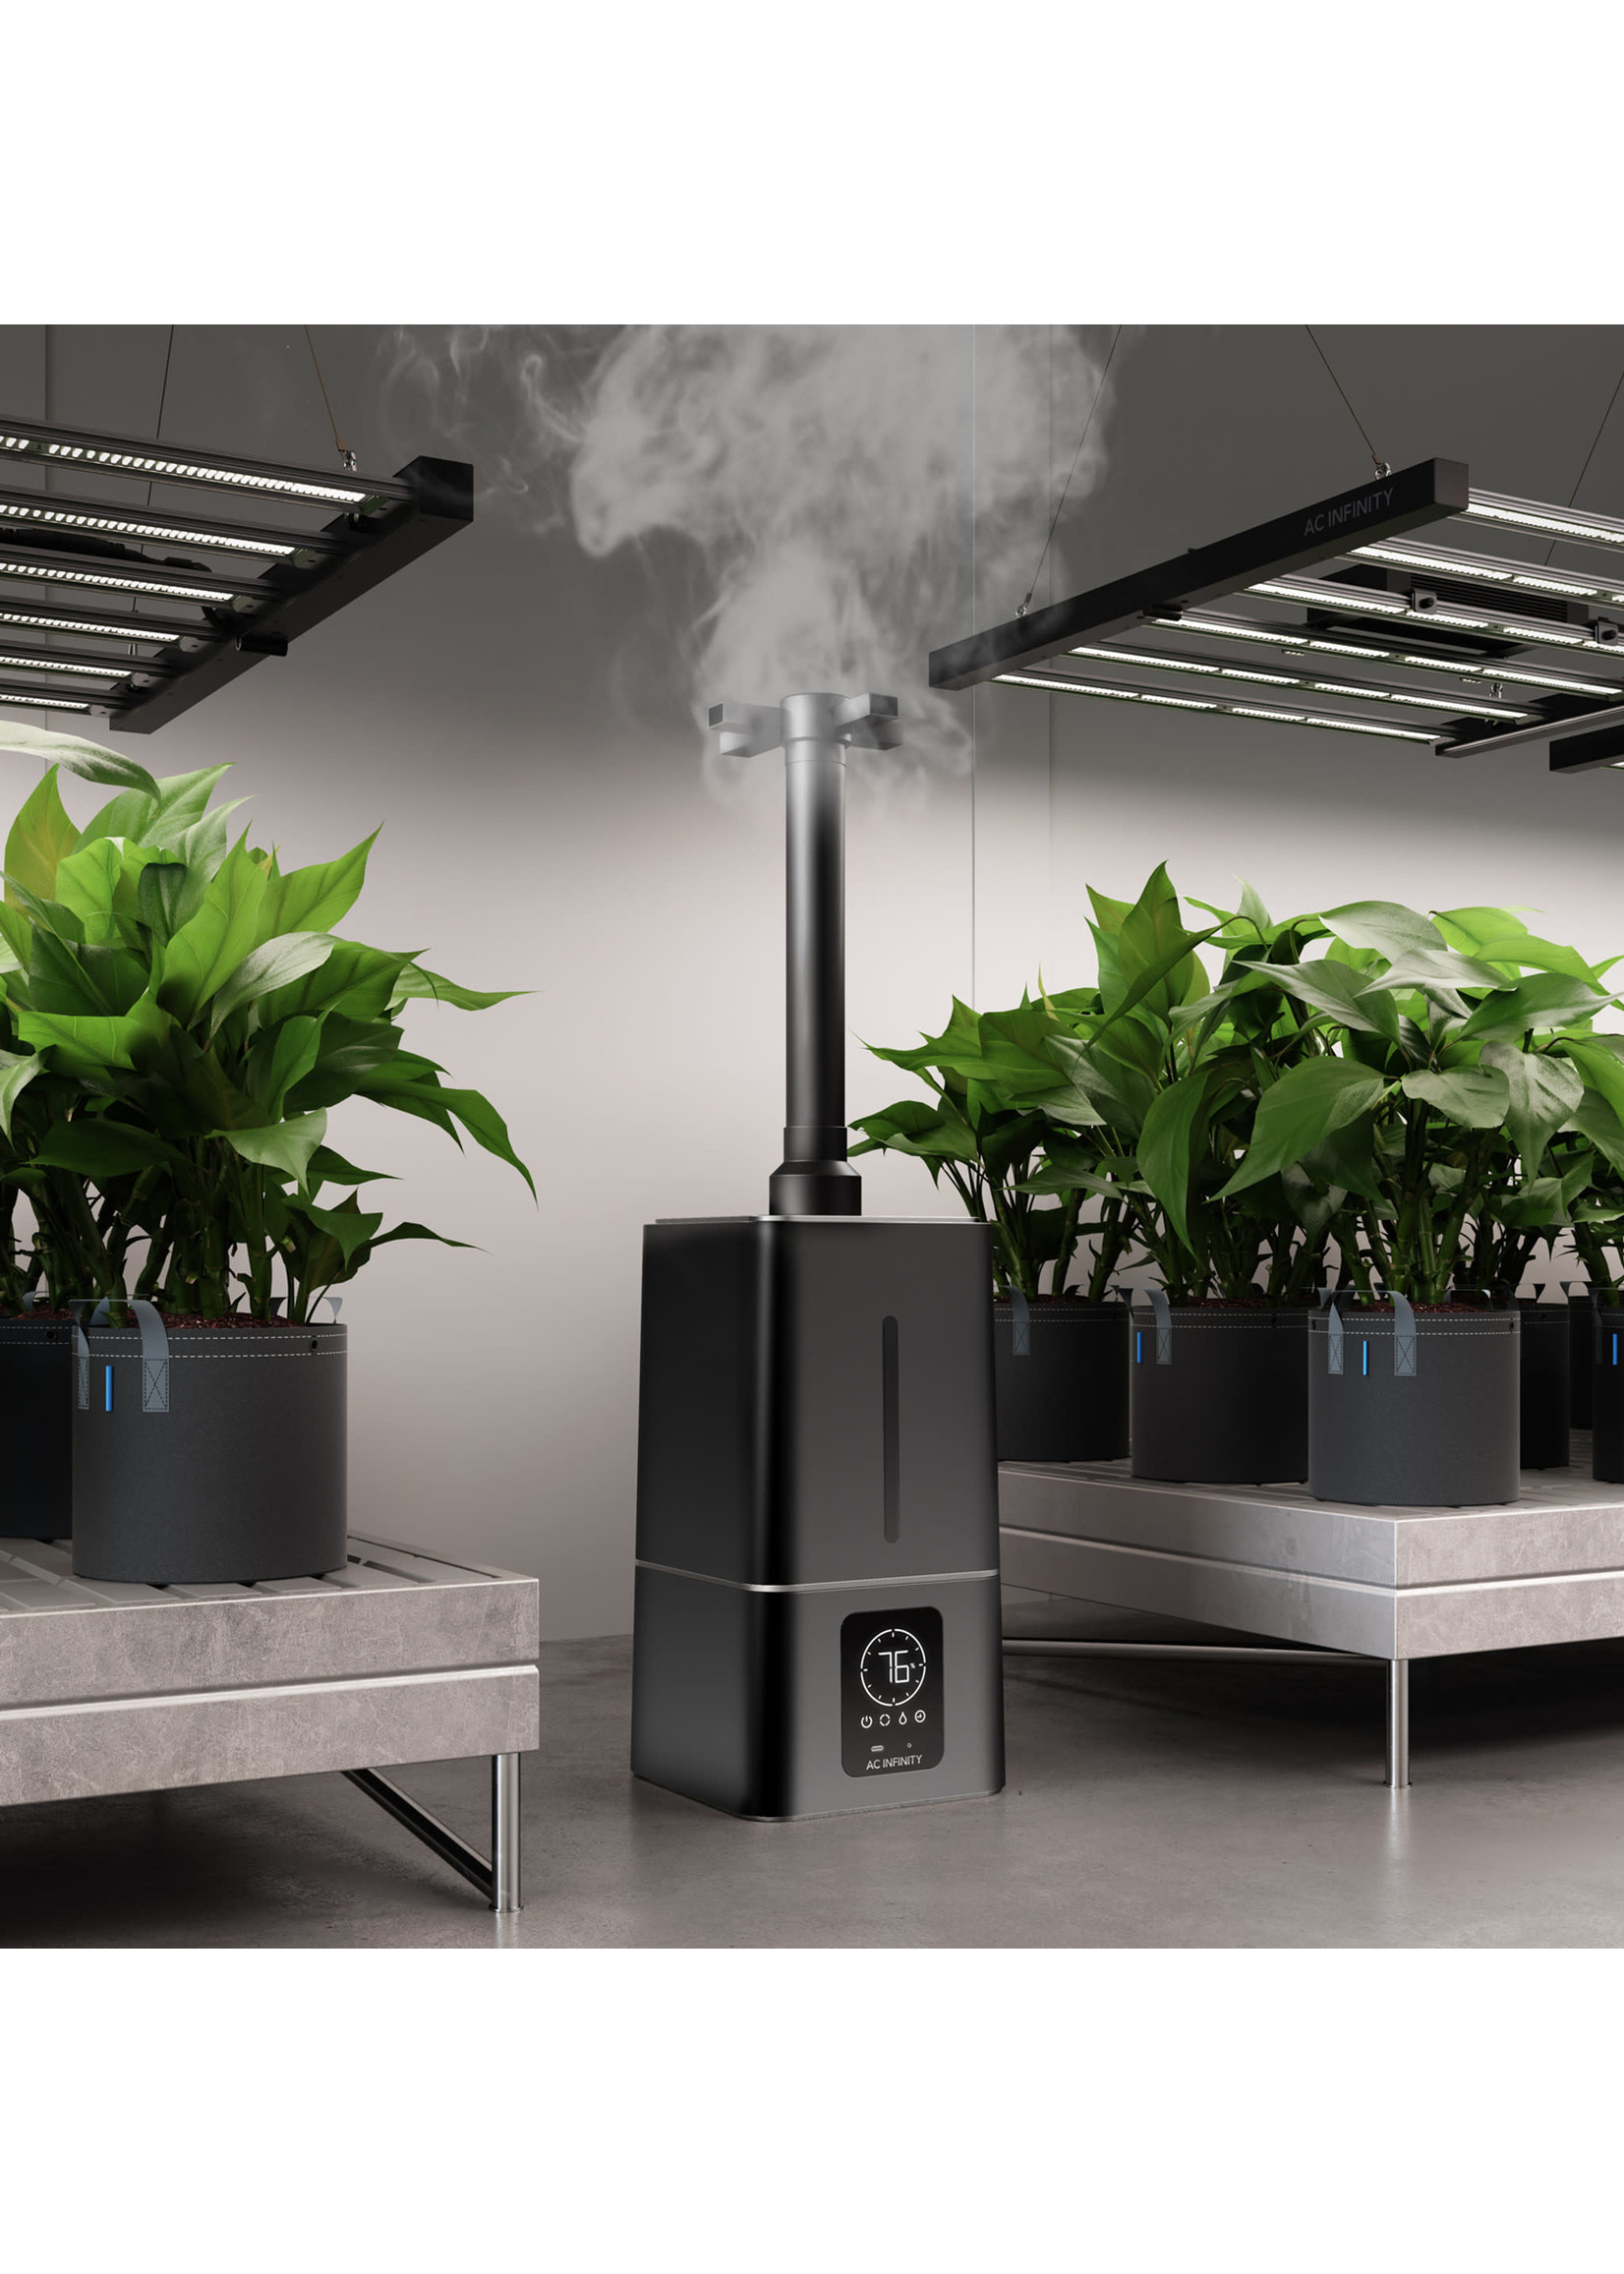 AC Infinity CLOUDFORGE T7, ENVIRONMENTAL PLANT HUMIDIFIER, 15L, SMART CONTROLS, TARGETED VAPORIZING